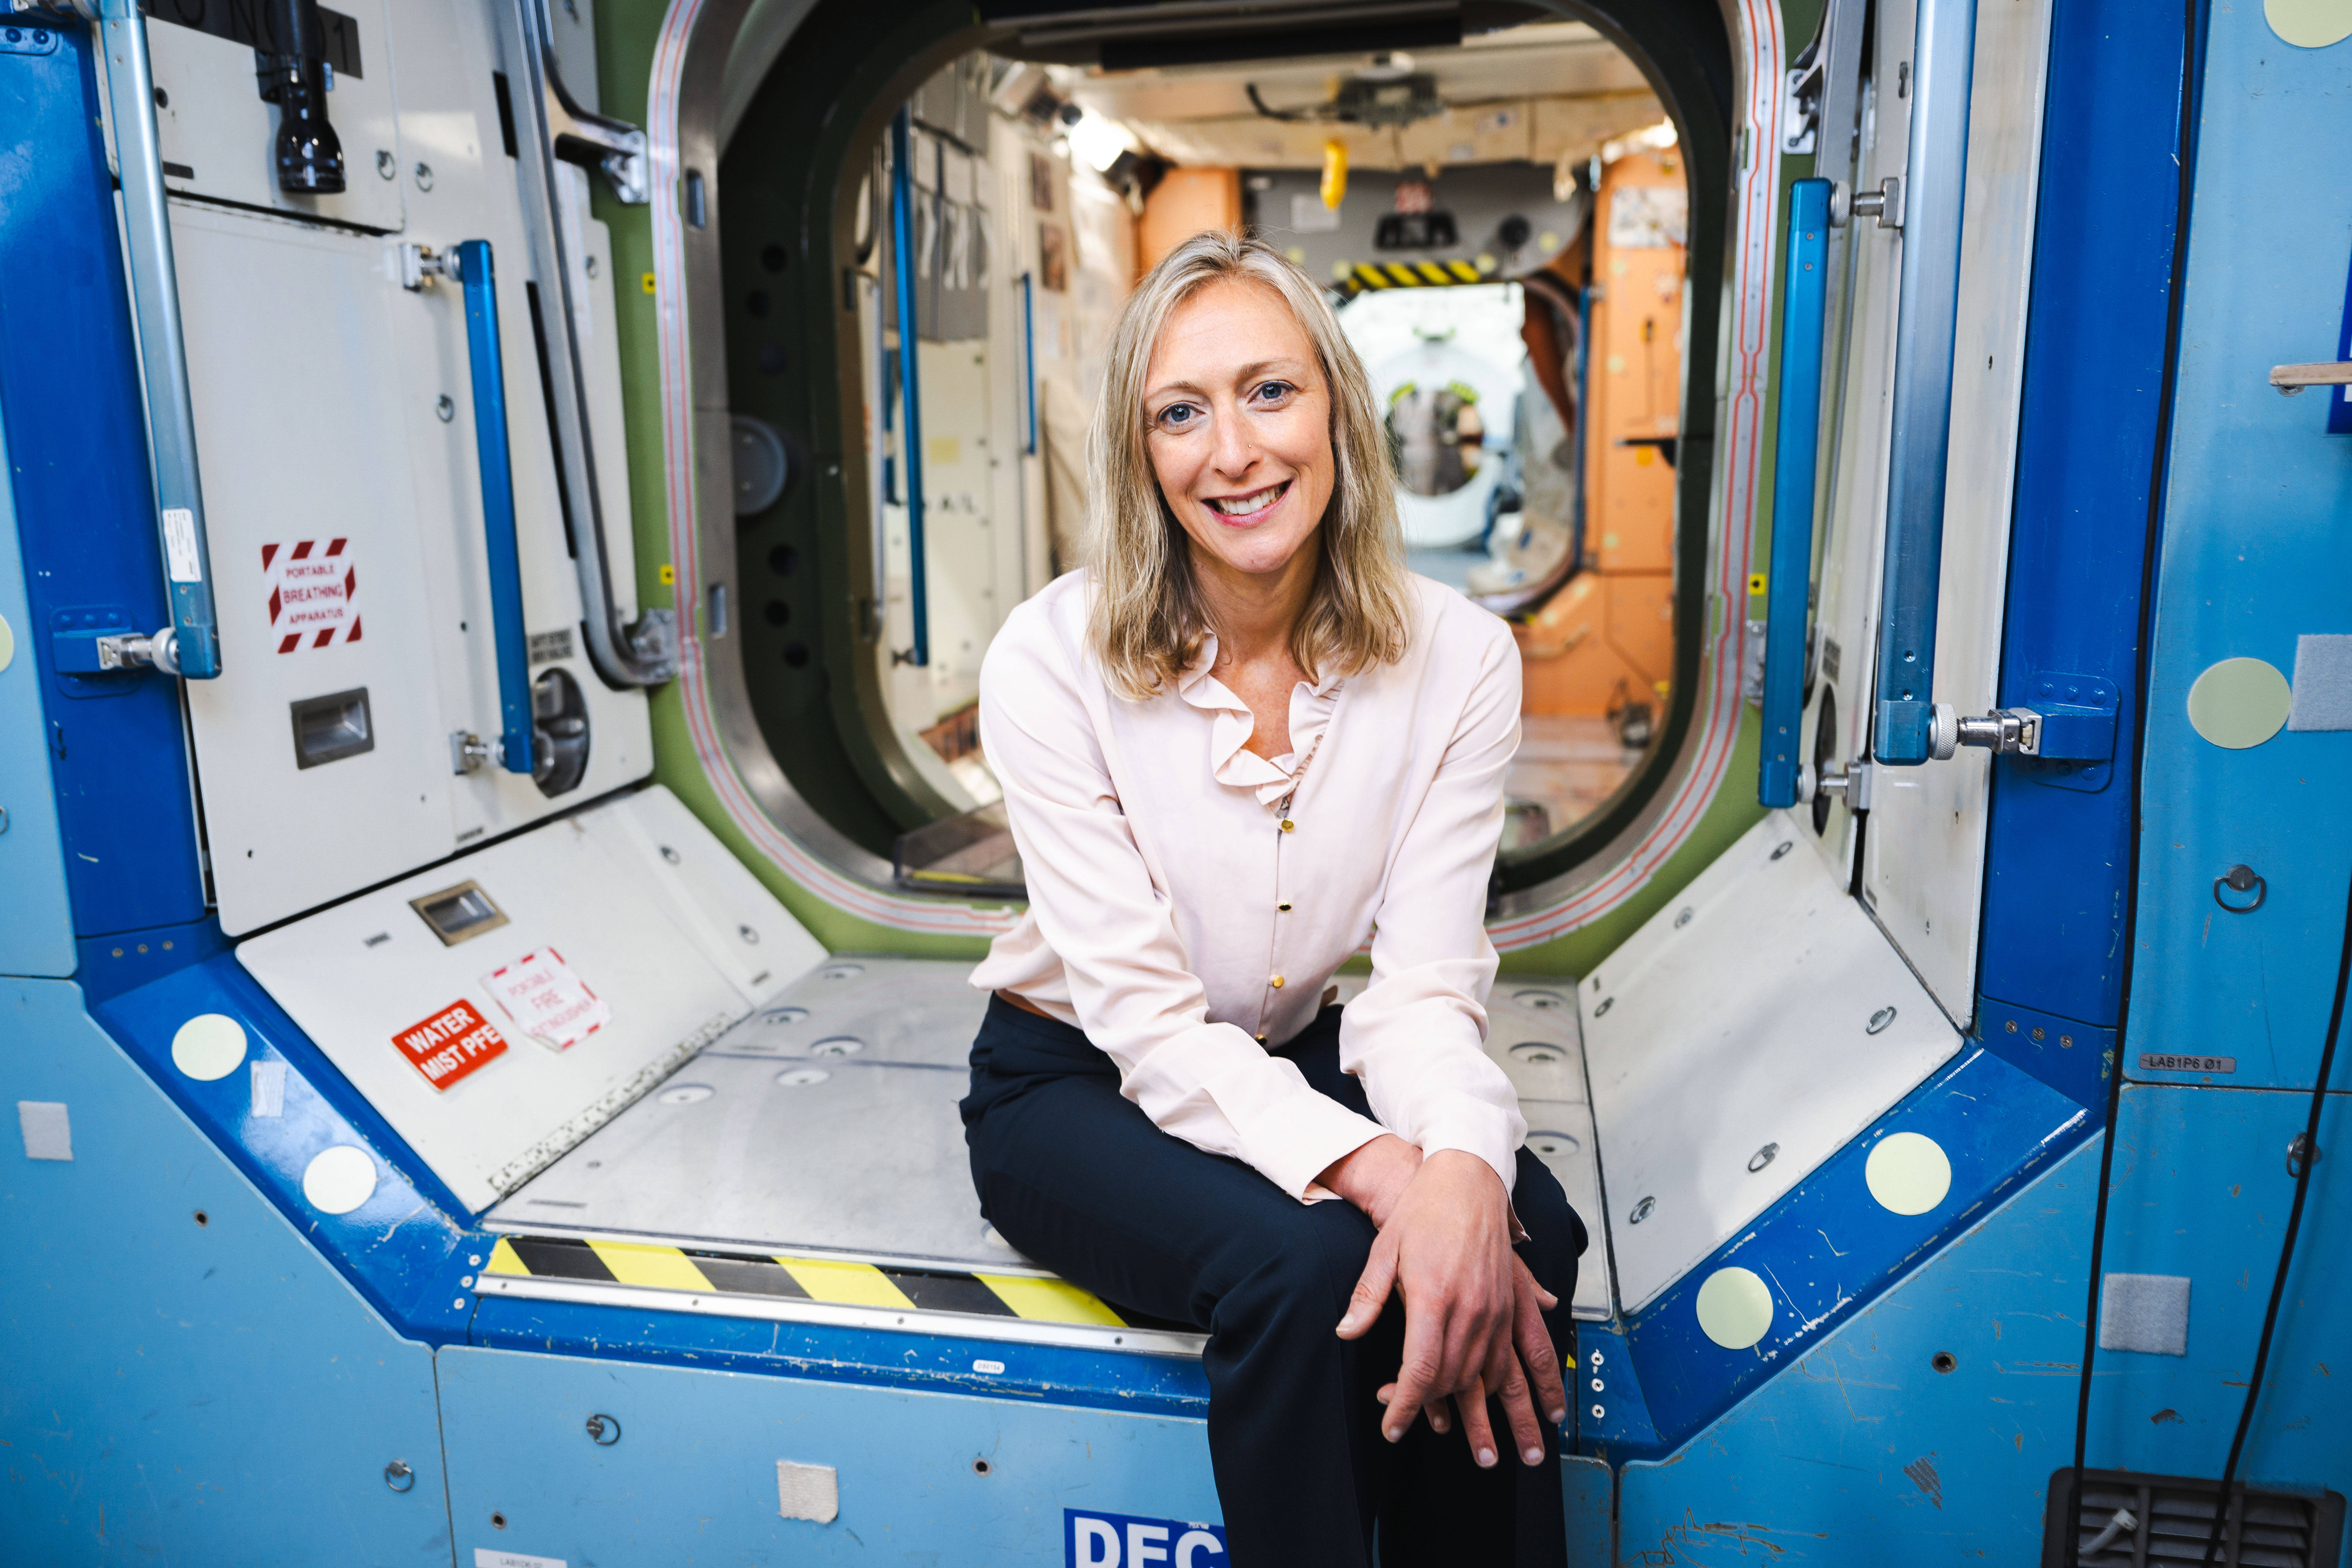 Meghan Everett, wearing dark dress pants and a light-colored blouse with buttons and a ruffled collar, smiles at the camera as she sits at the edge of one of the International Space Station modules inside the Space Vehicle Mockup Facility at NASA's Johnson Space Center. The edges of the module mockup are blue, with a yellow and black striped warning strip present on the step where Meghan is sitting. Blue handrails are present on both sides of the module mockup, and a wide variety of labels are visible on all of the module mockup surfaces within.